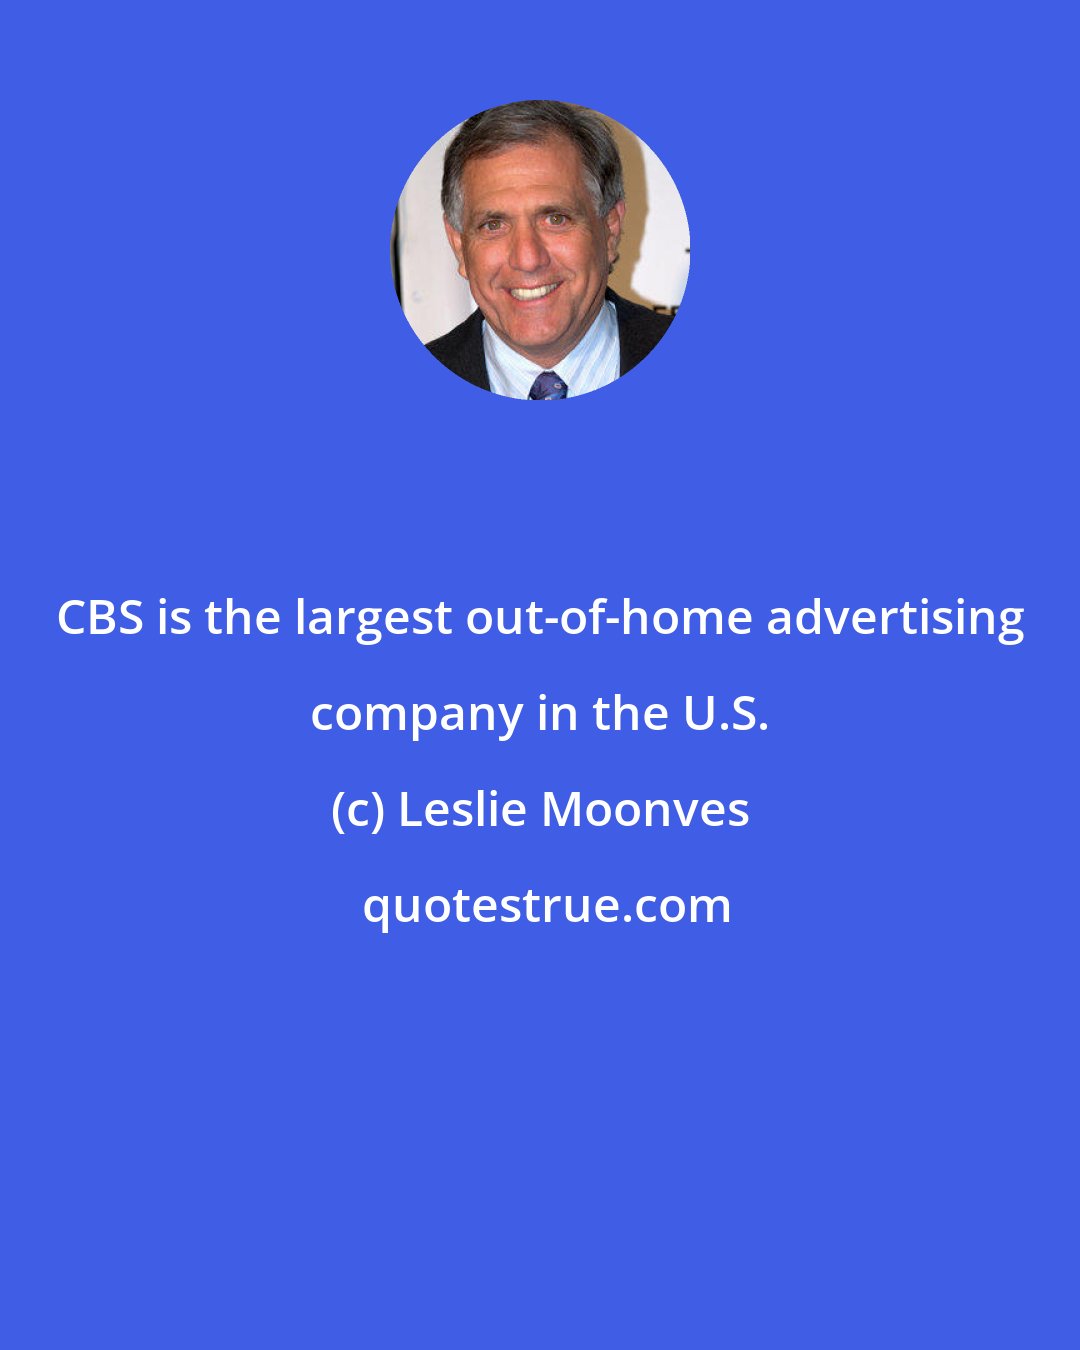 Leslie Moonves: CBS is the largest out-of-home advertising company in the U.S.